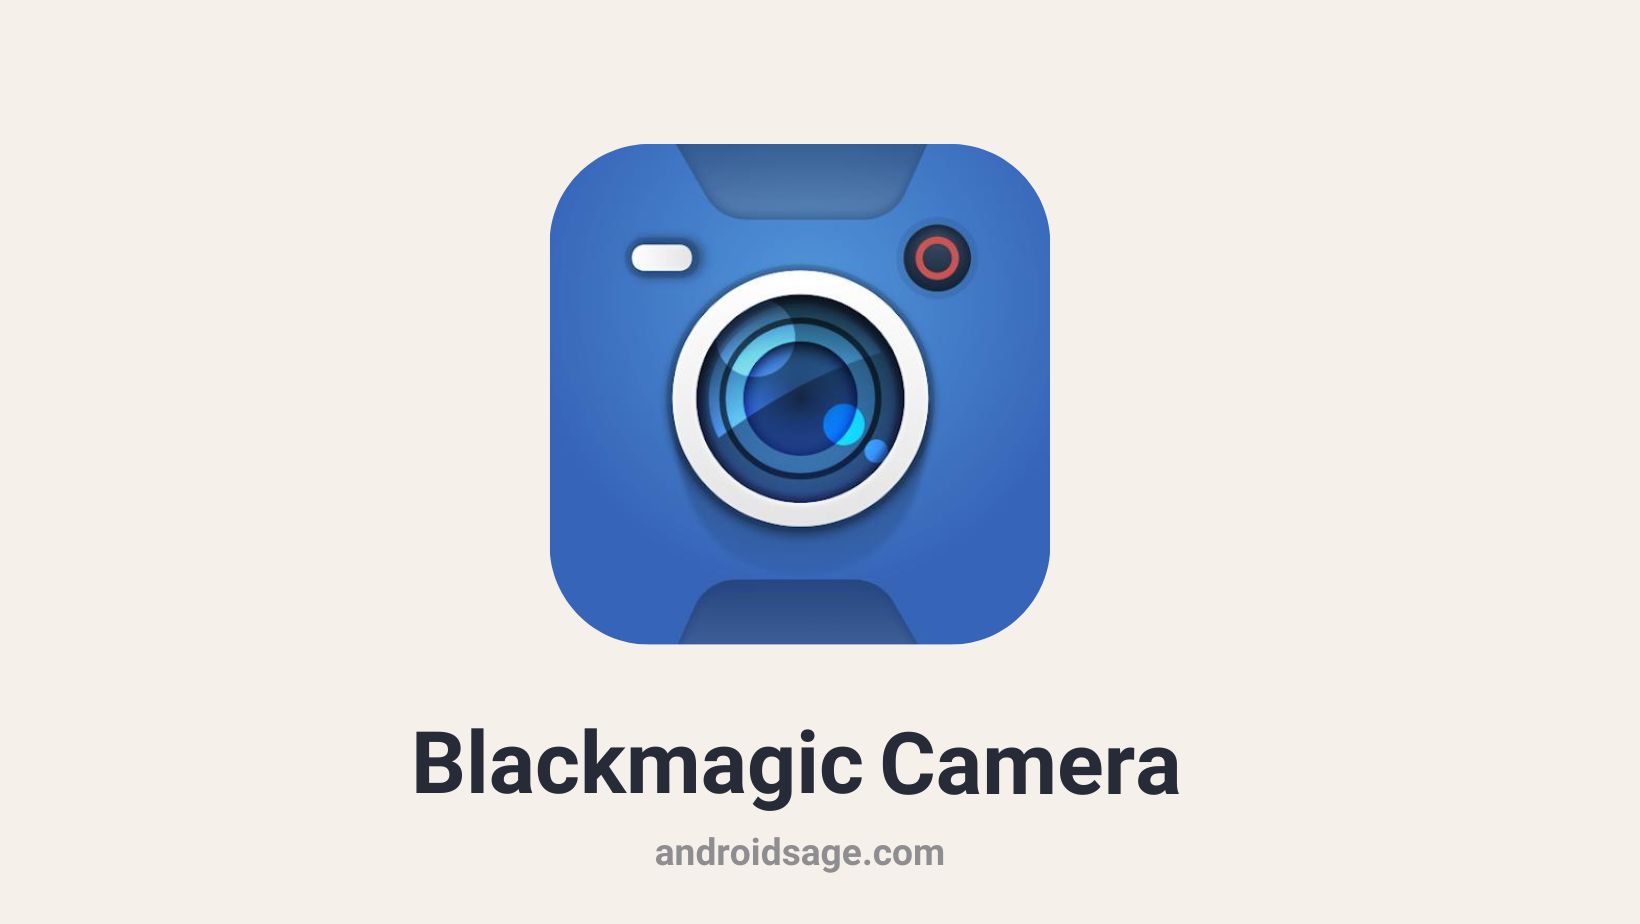 Blackmagic Camera App now available for Android and iOS with digital film camera controls and image processing [Download]